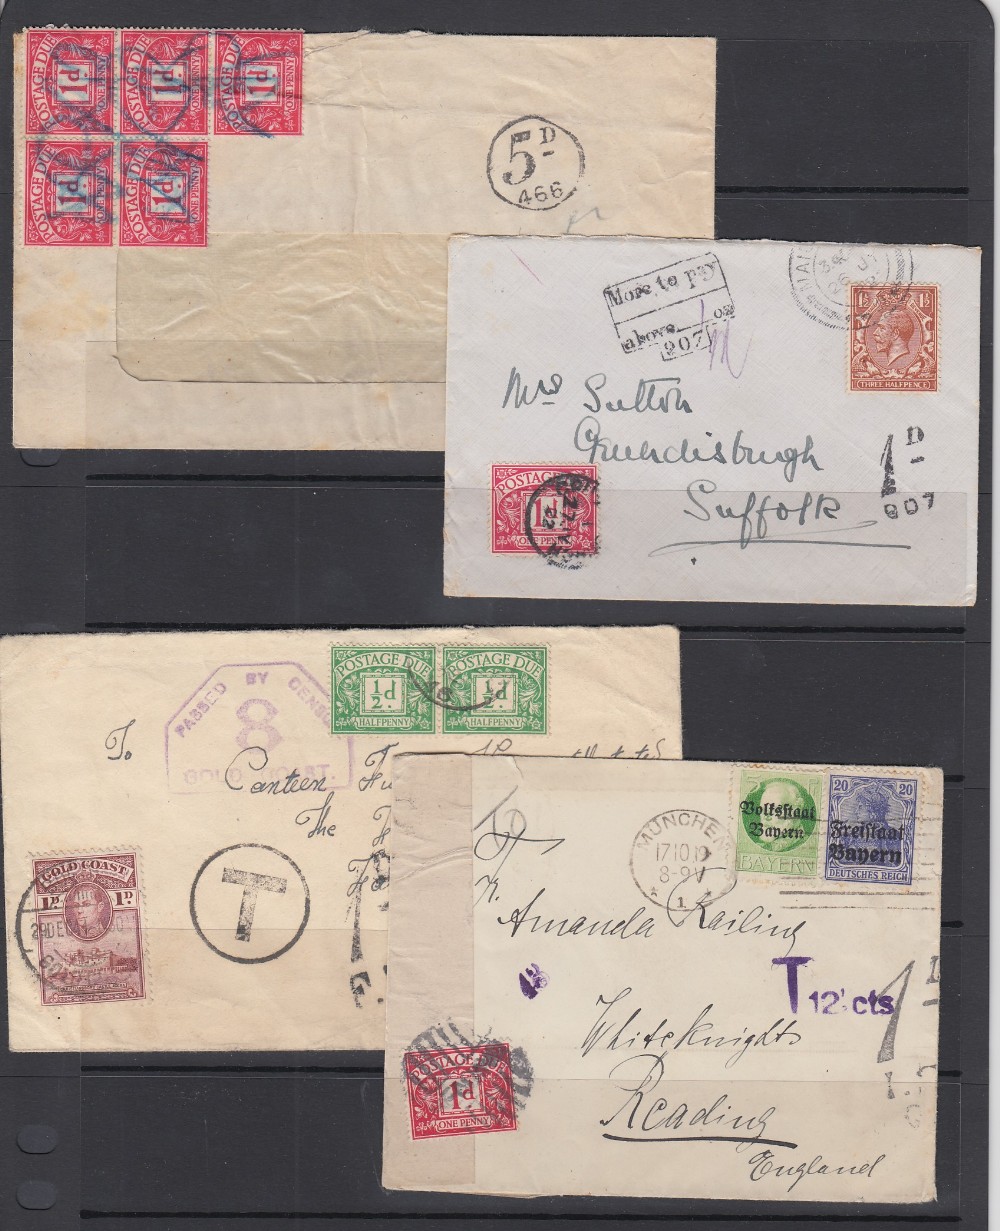 GREAT BRITIAN STAMPS : POSTAGE DUES, selection of 18 covers 1917-53, various instructional markings. - Image 4 of 6